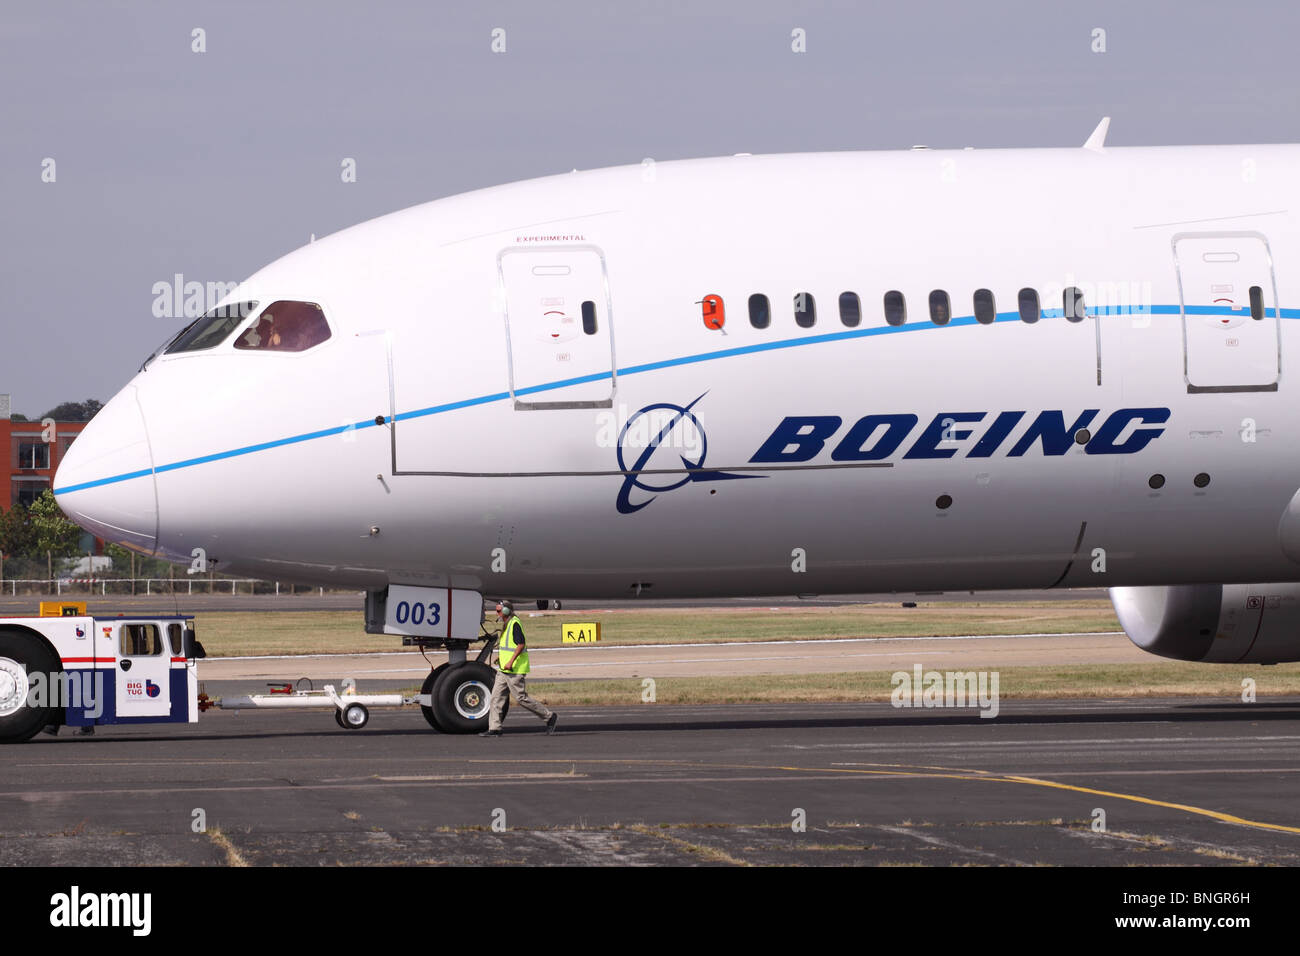 Boeing 787 Dreamliner prototype airliner aircraft at Farnborough Air Stock Photo ...1300 x 956